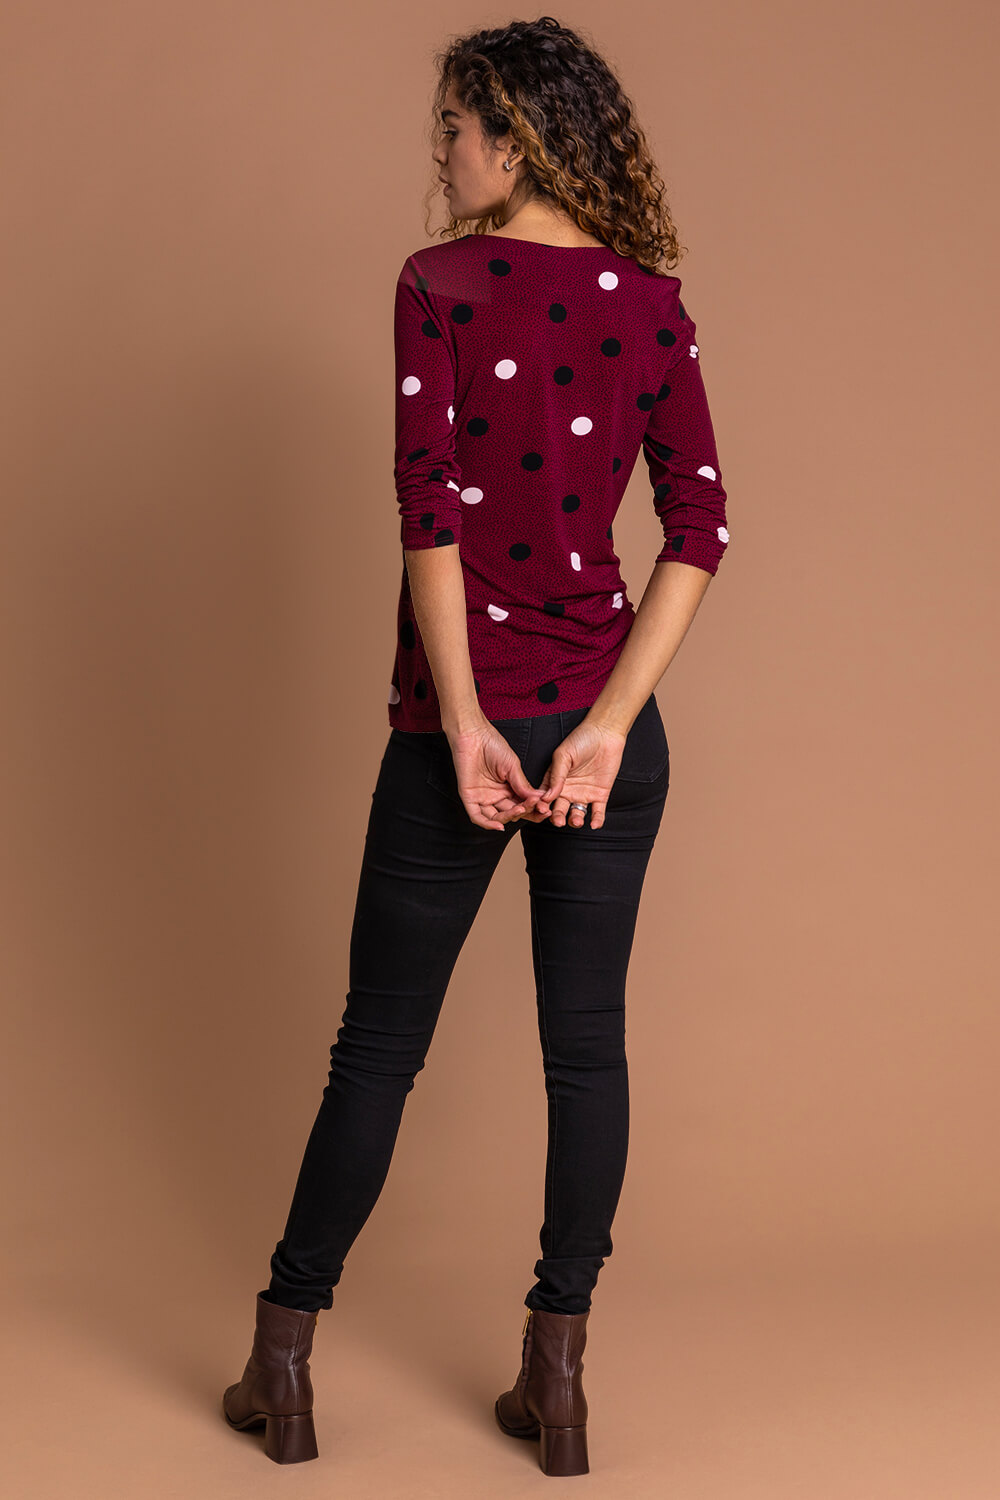 Bordeaux Polka Dot Ruched 3/4 Sleeve Jersey Top, Image 2 of 5